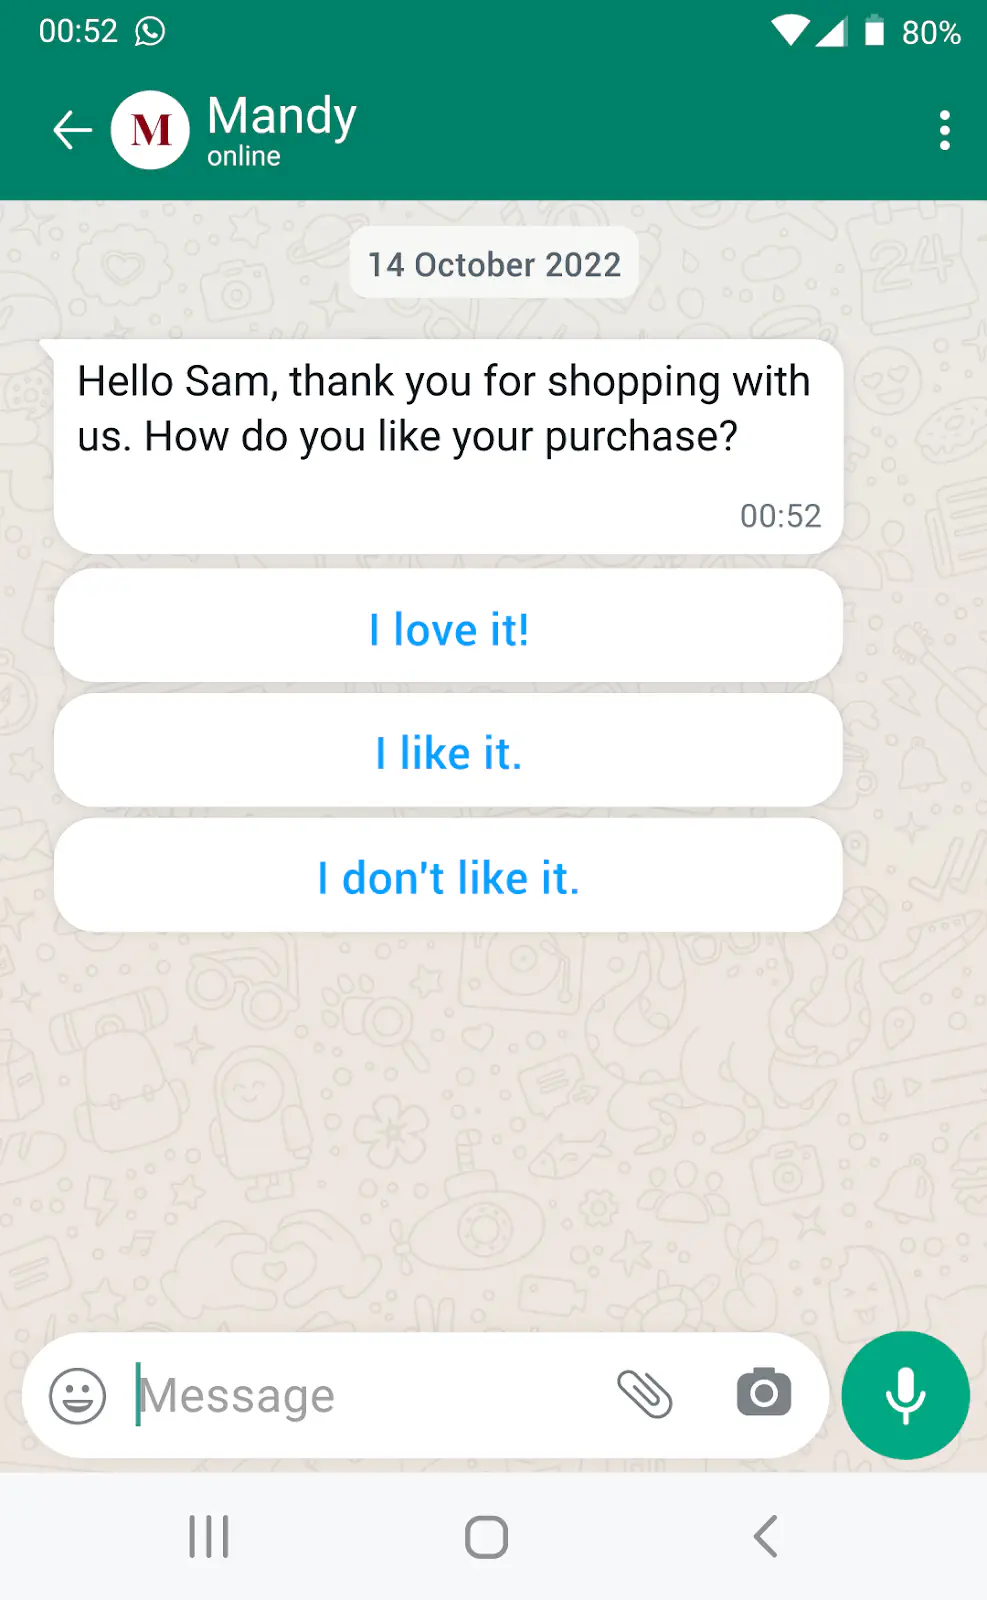 Interactive WhatsApp message for collecting customer feedback.